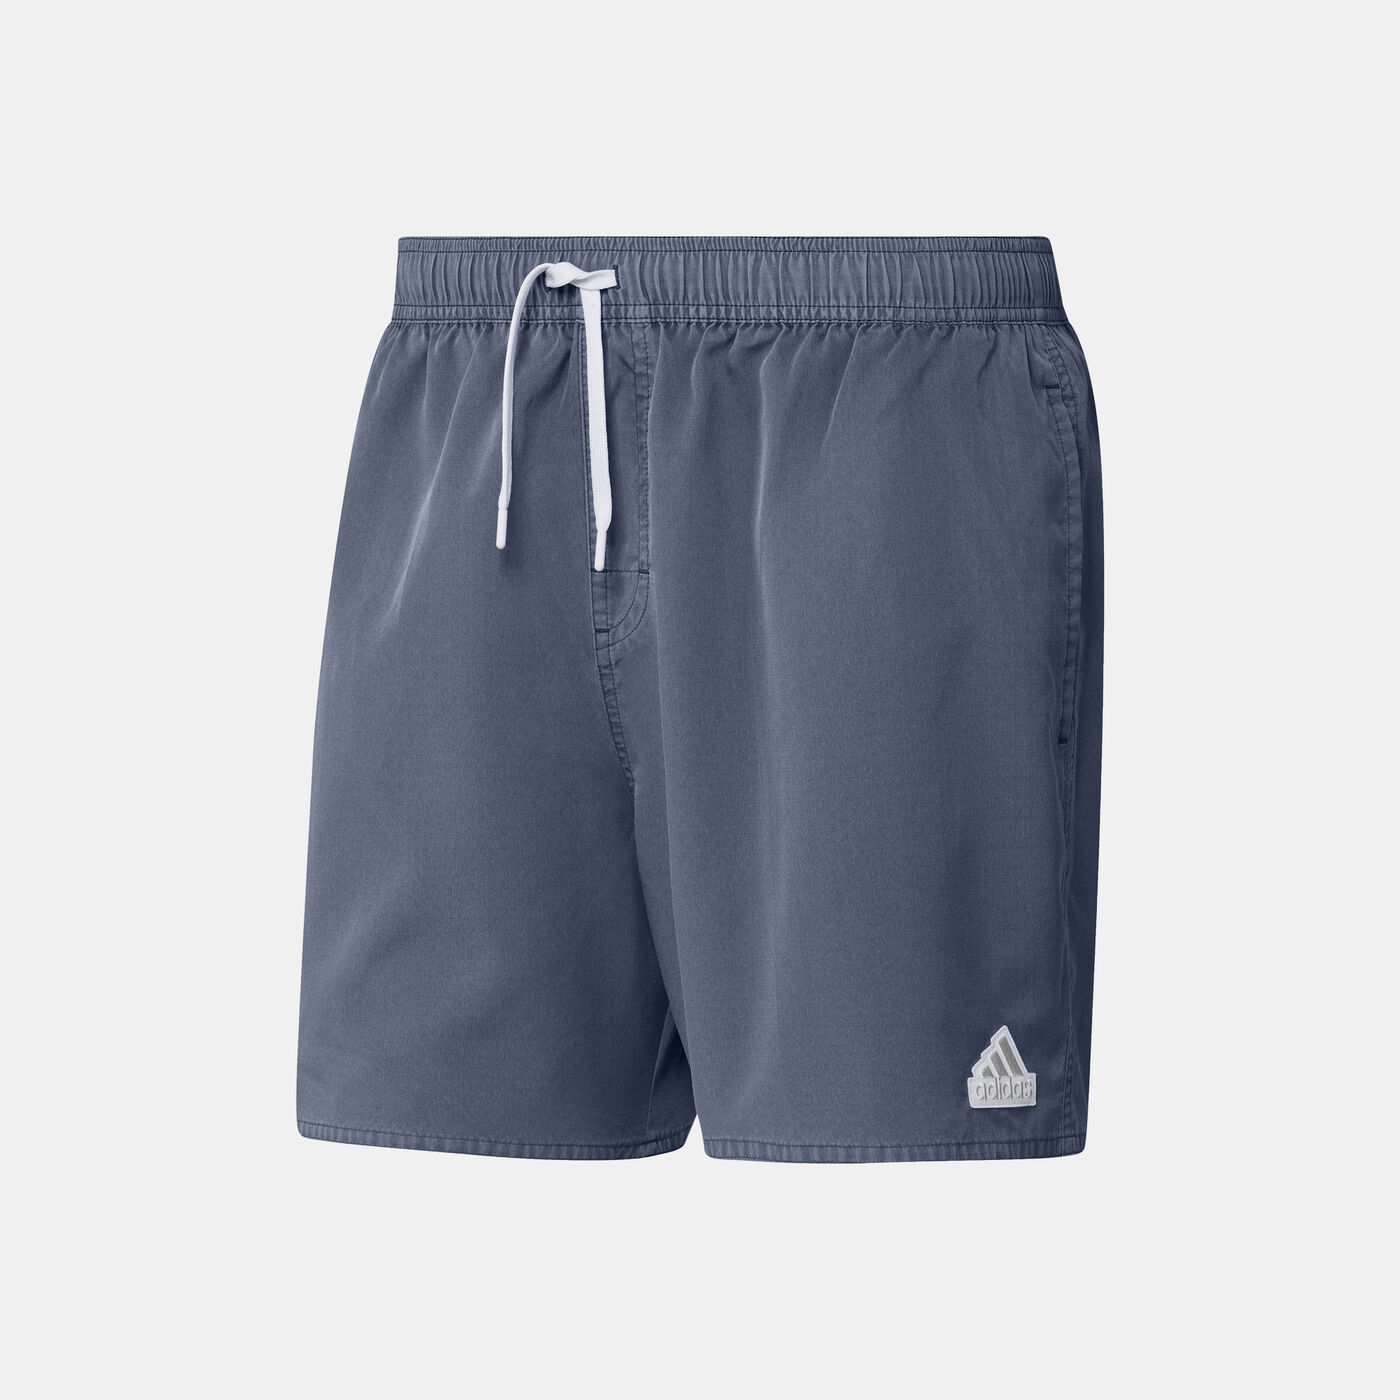 Men's Washed Out Cix Swimming Shorts